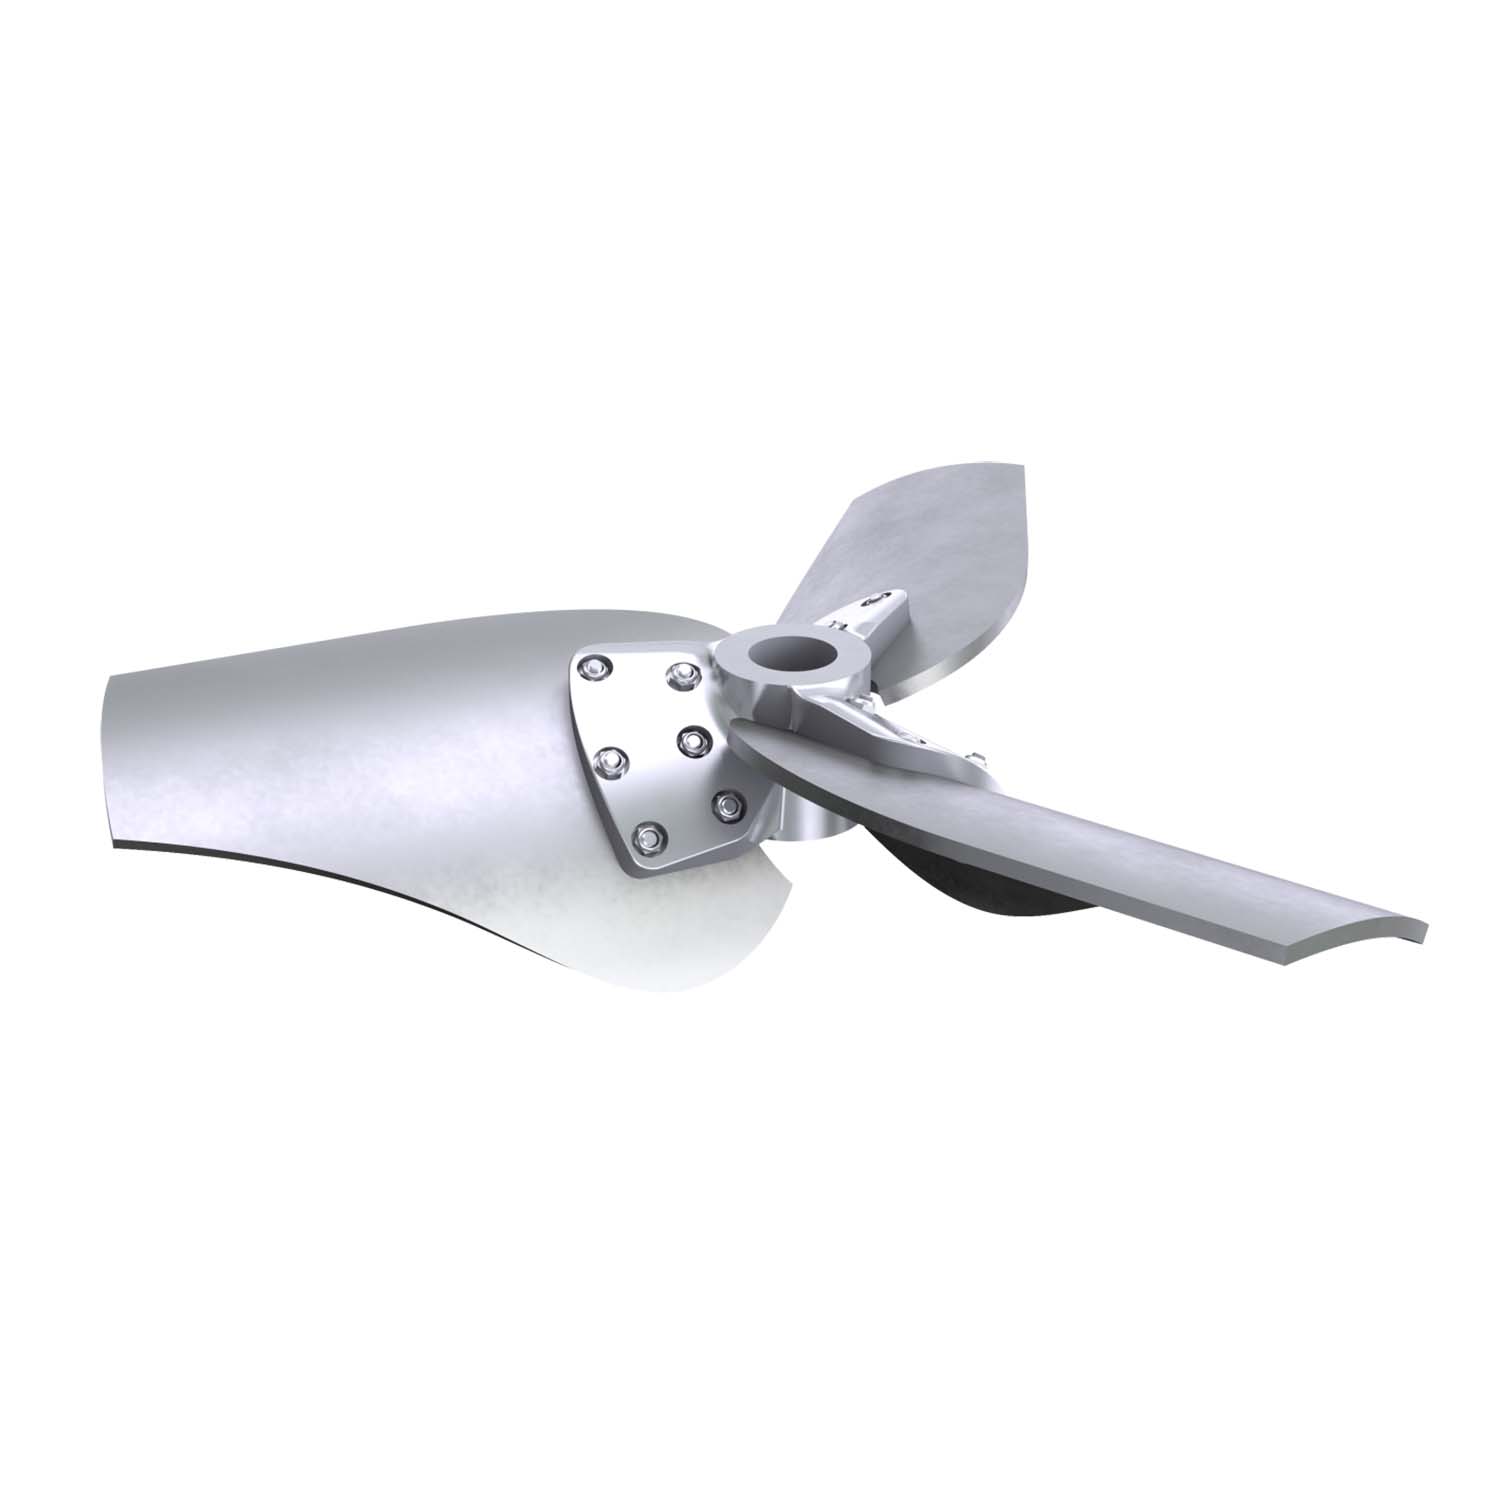 Greater power savings could be achieve with Scaba hydrofoil high-efficiency impeller versus pitch blade turbine